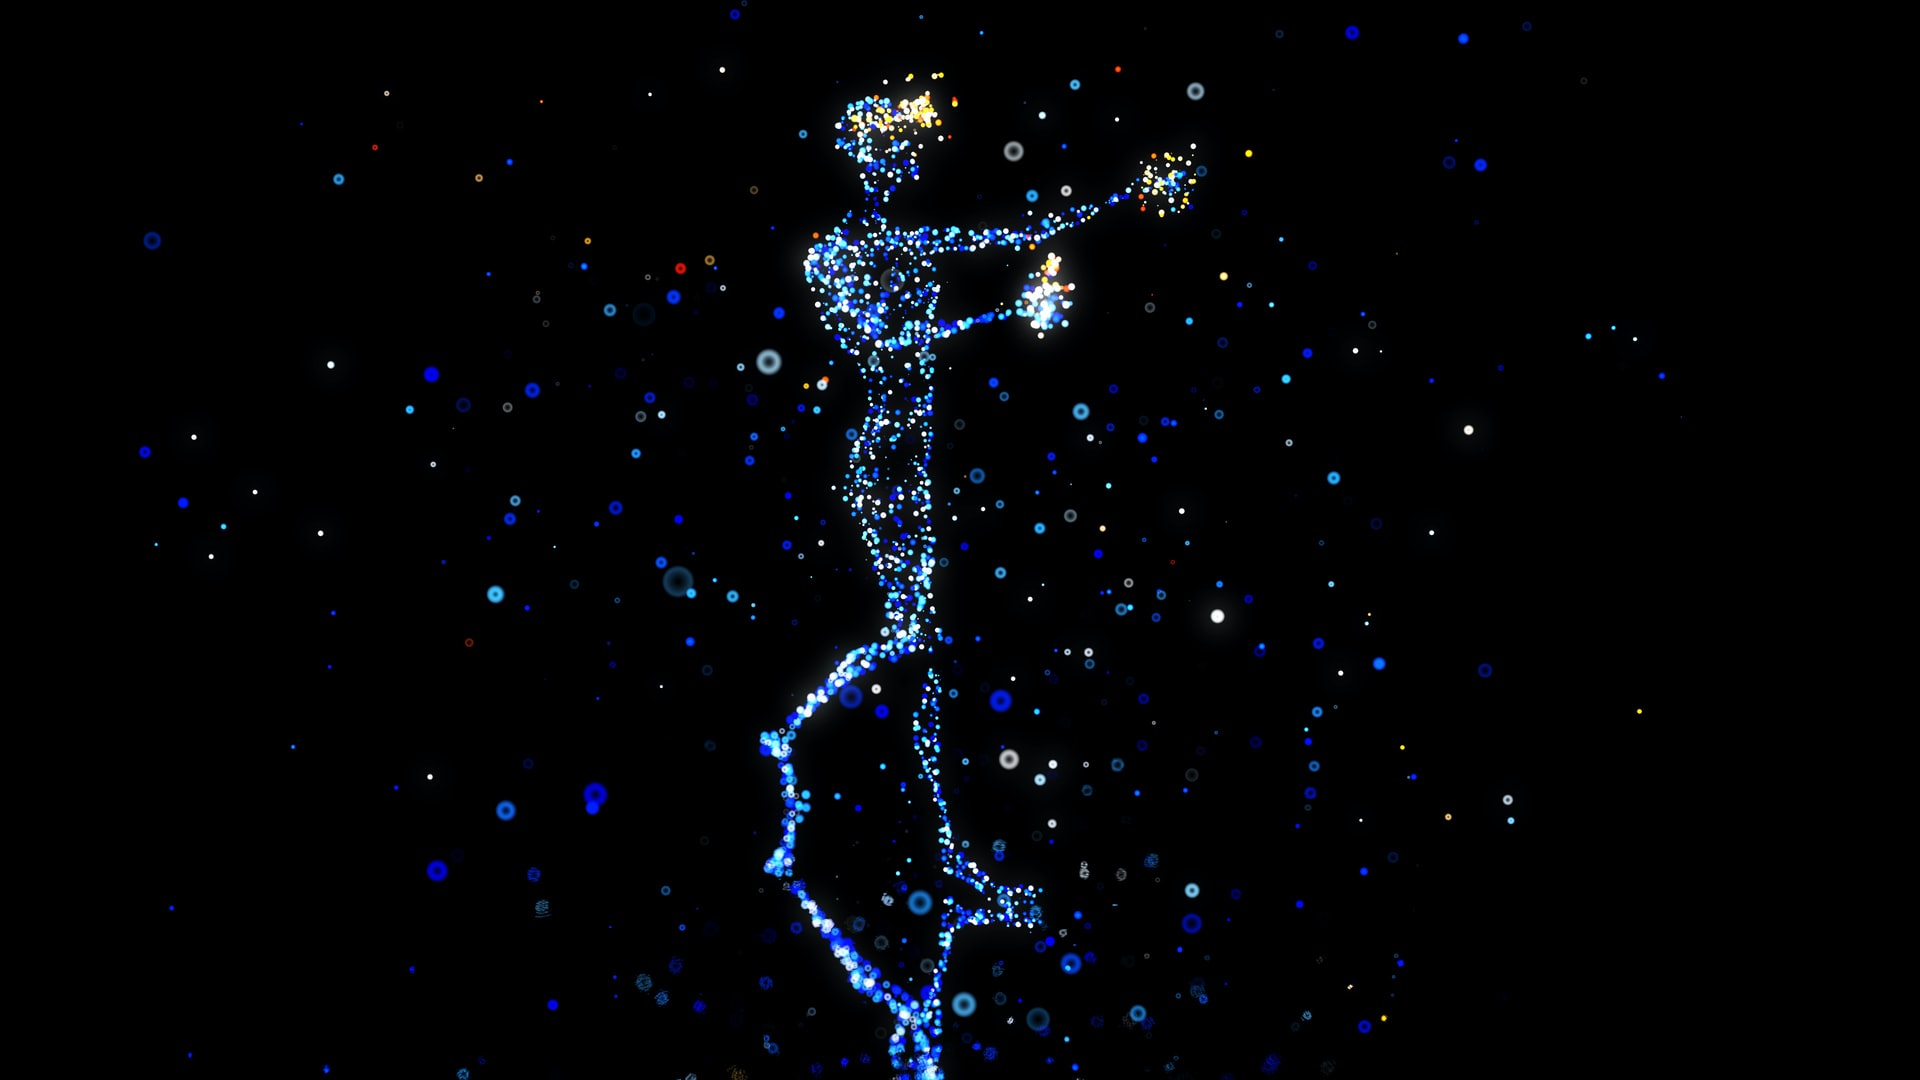 A digital image of person's outline made using small lights.